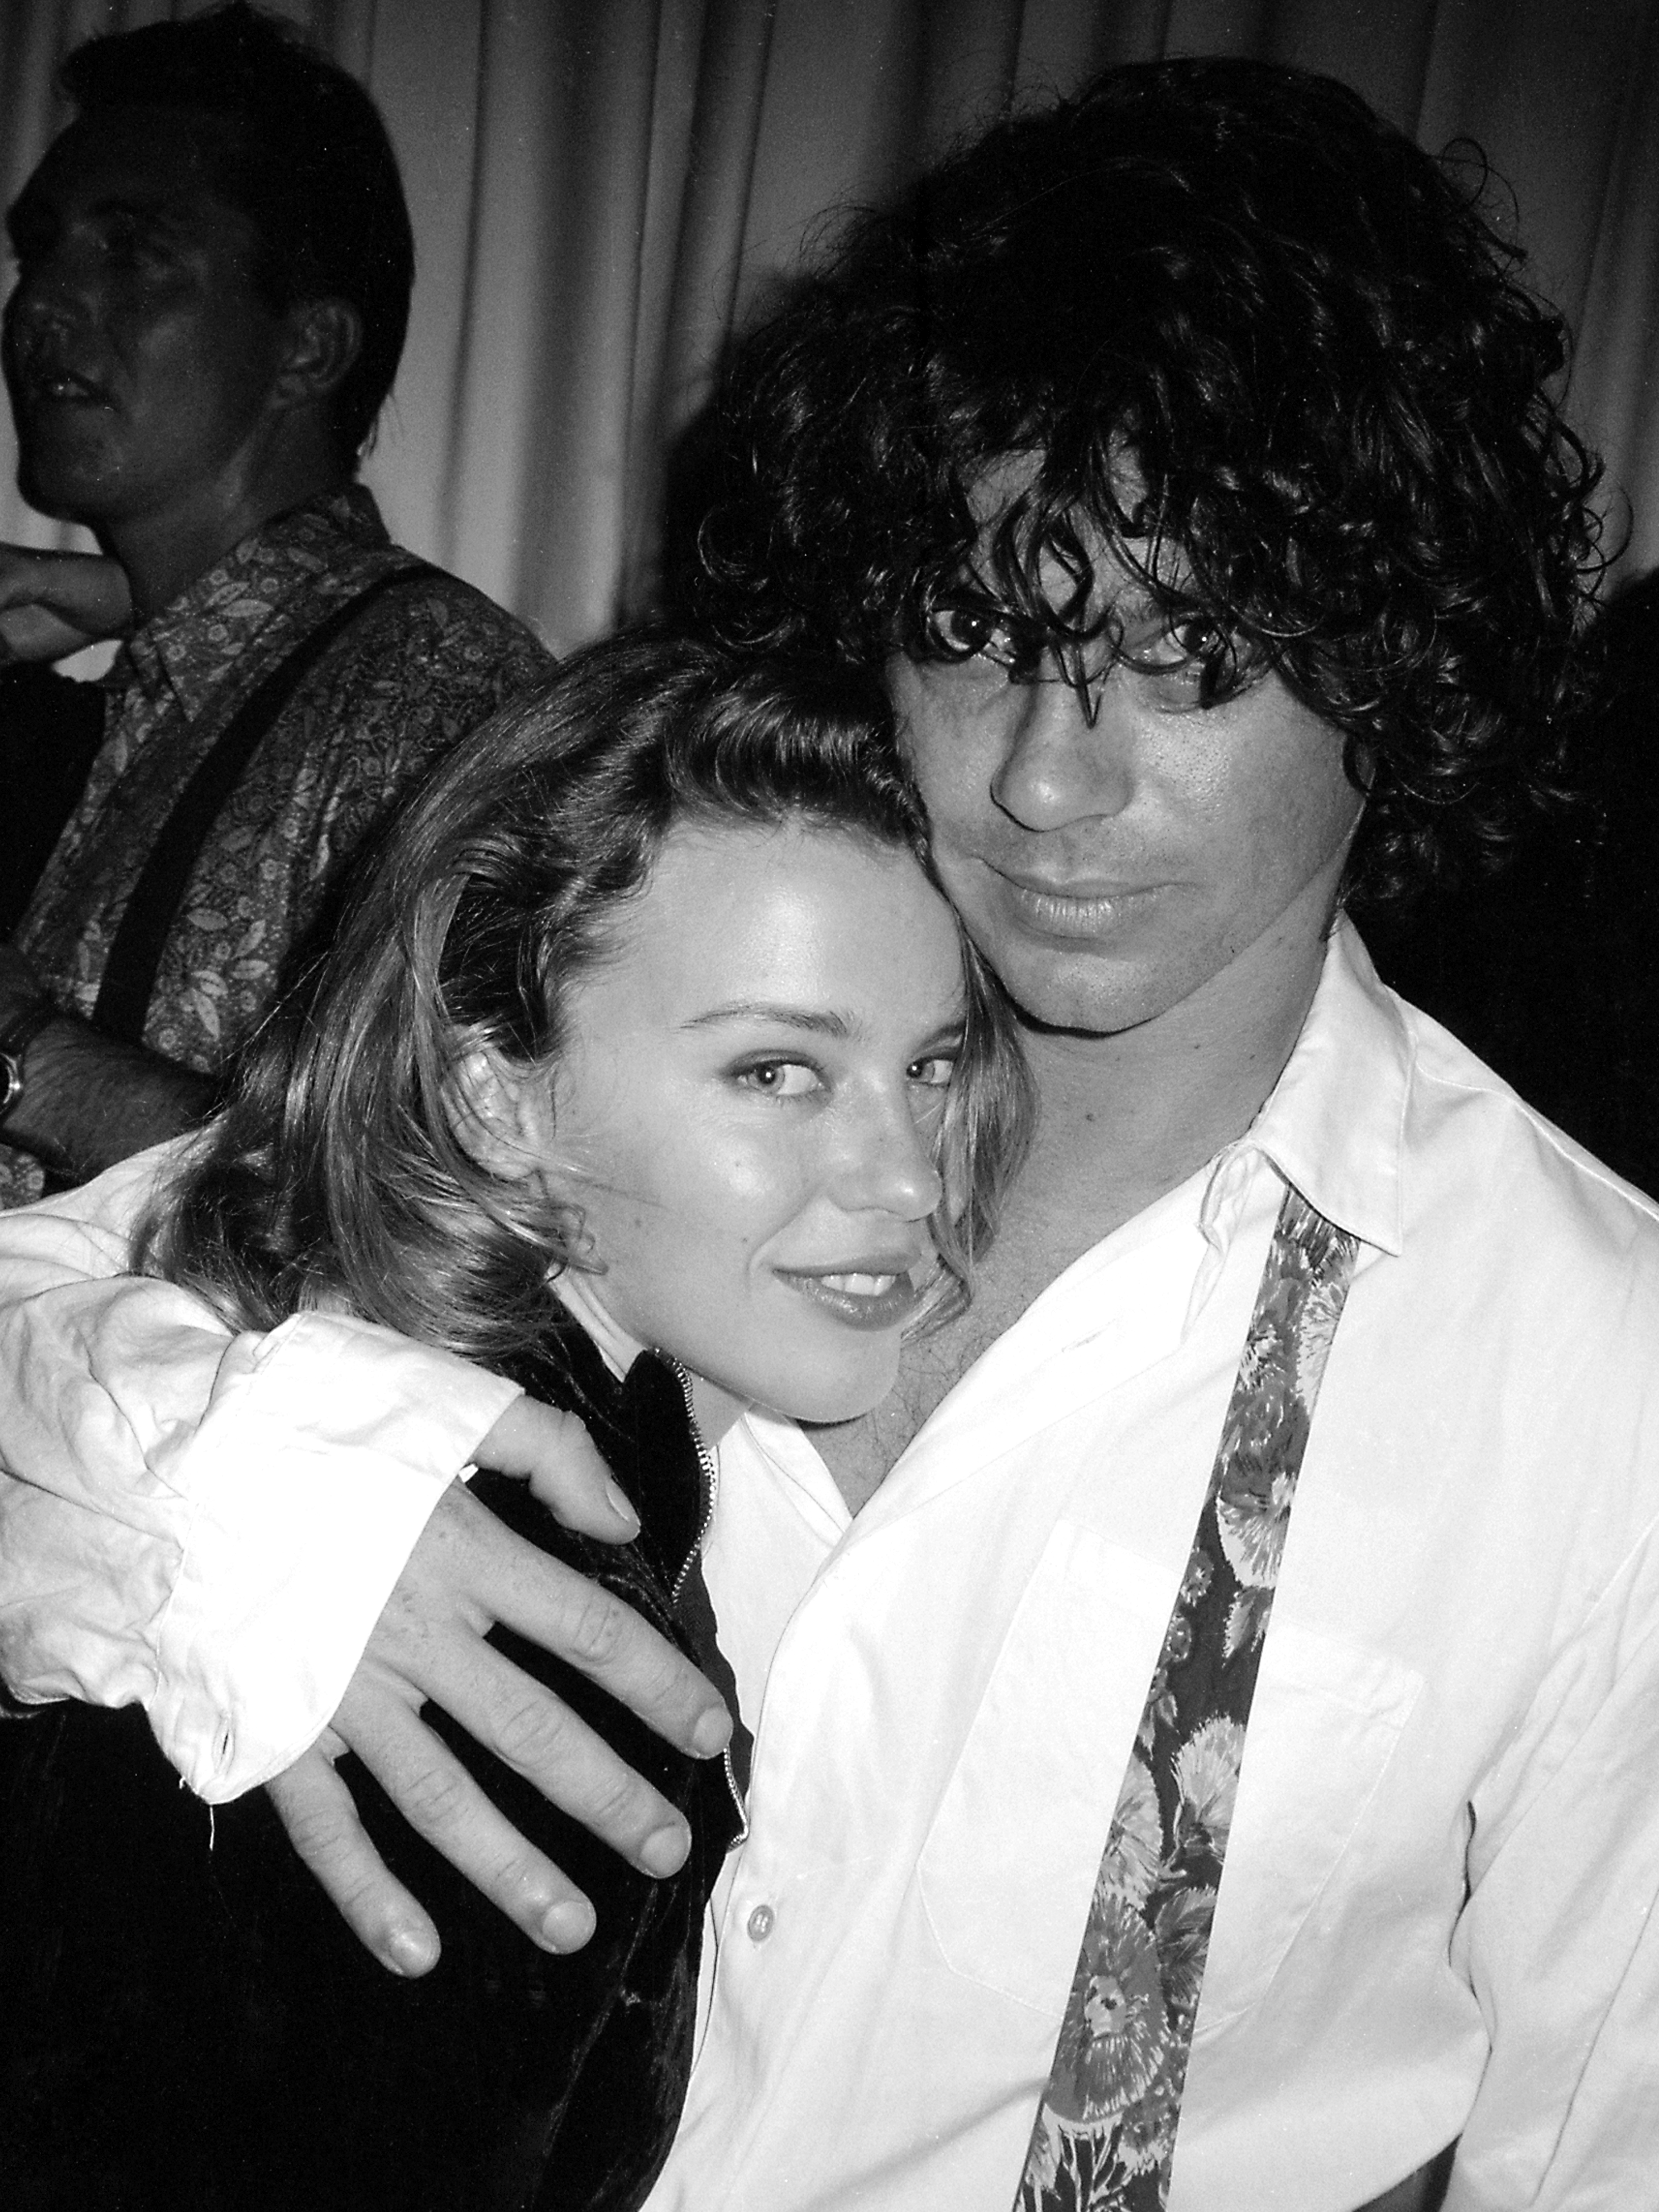 Kylie Minogue and Michael Hutchence at his 30th birthday, Sydney 1990